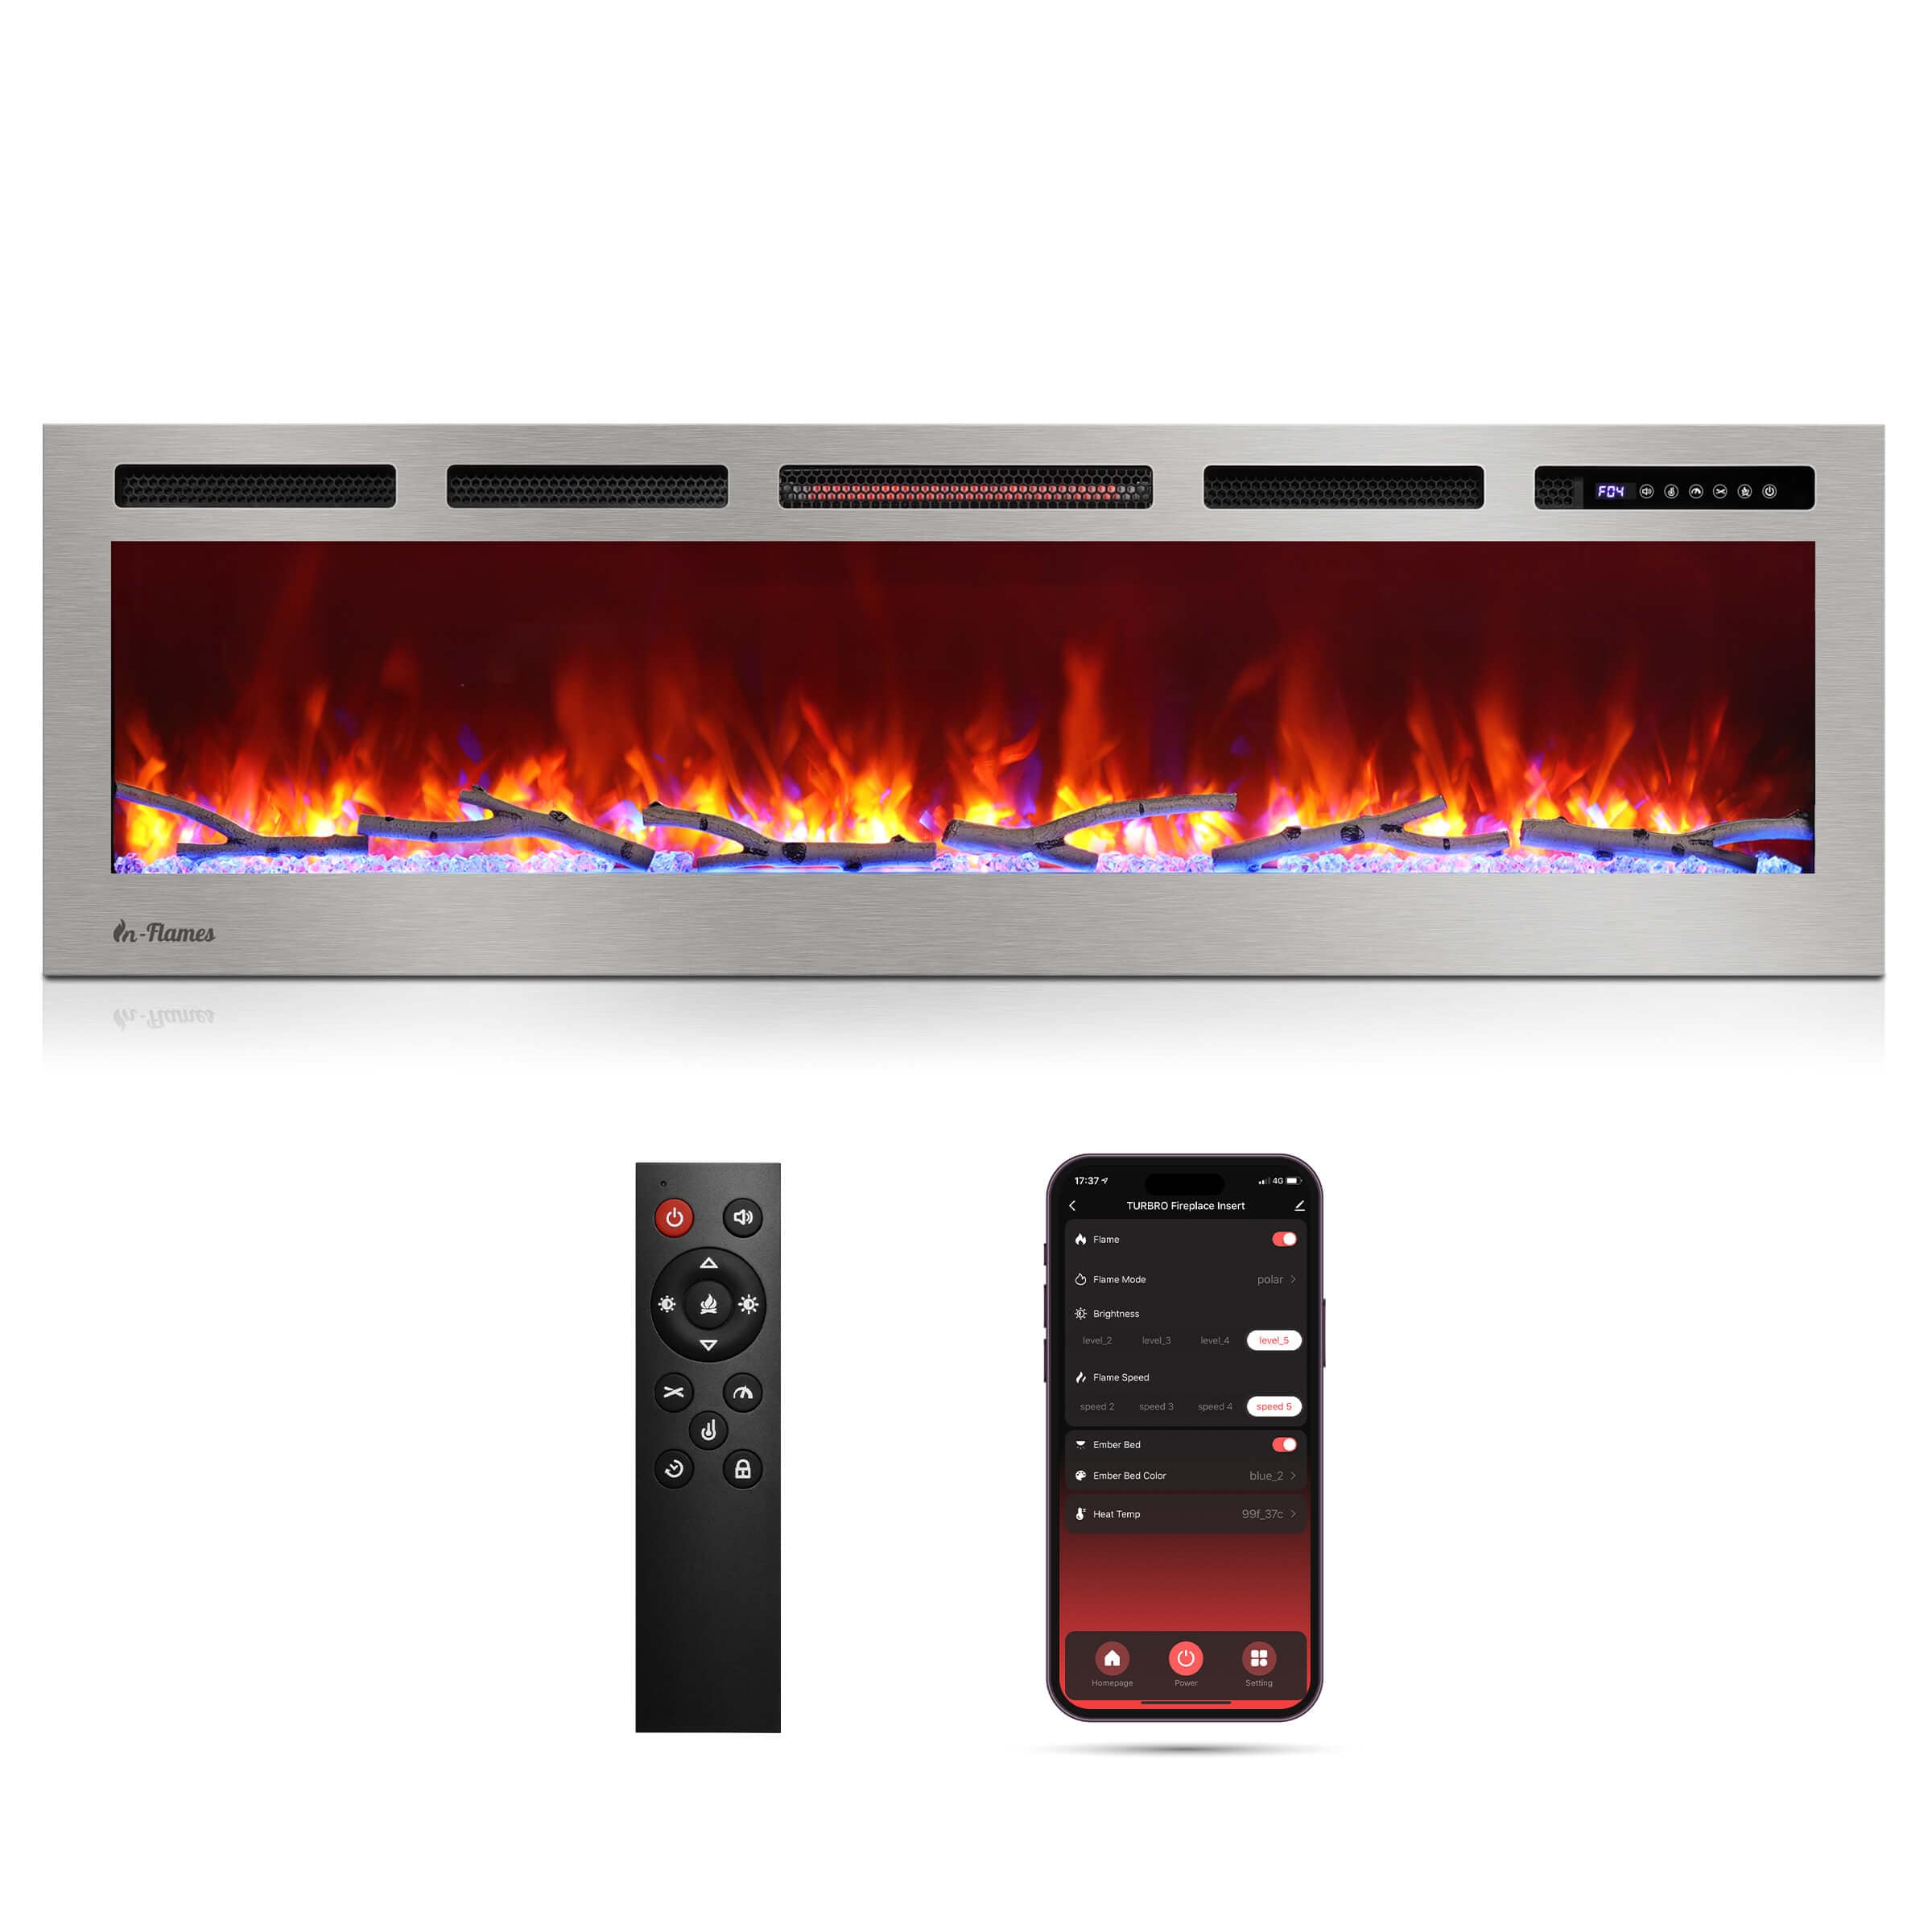 TURBRO In Flames WiFi Smart Wall Mounted Electric Fireplace - Stainless Steel Wall Mounted Electric Fireplace 60 inch